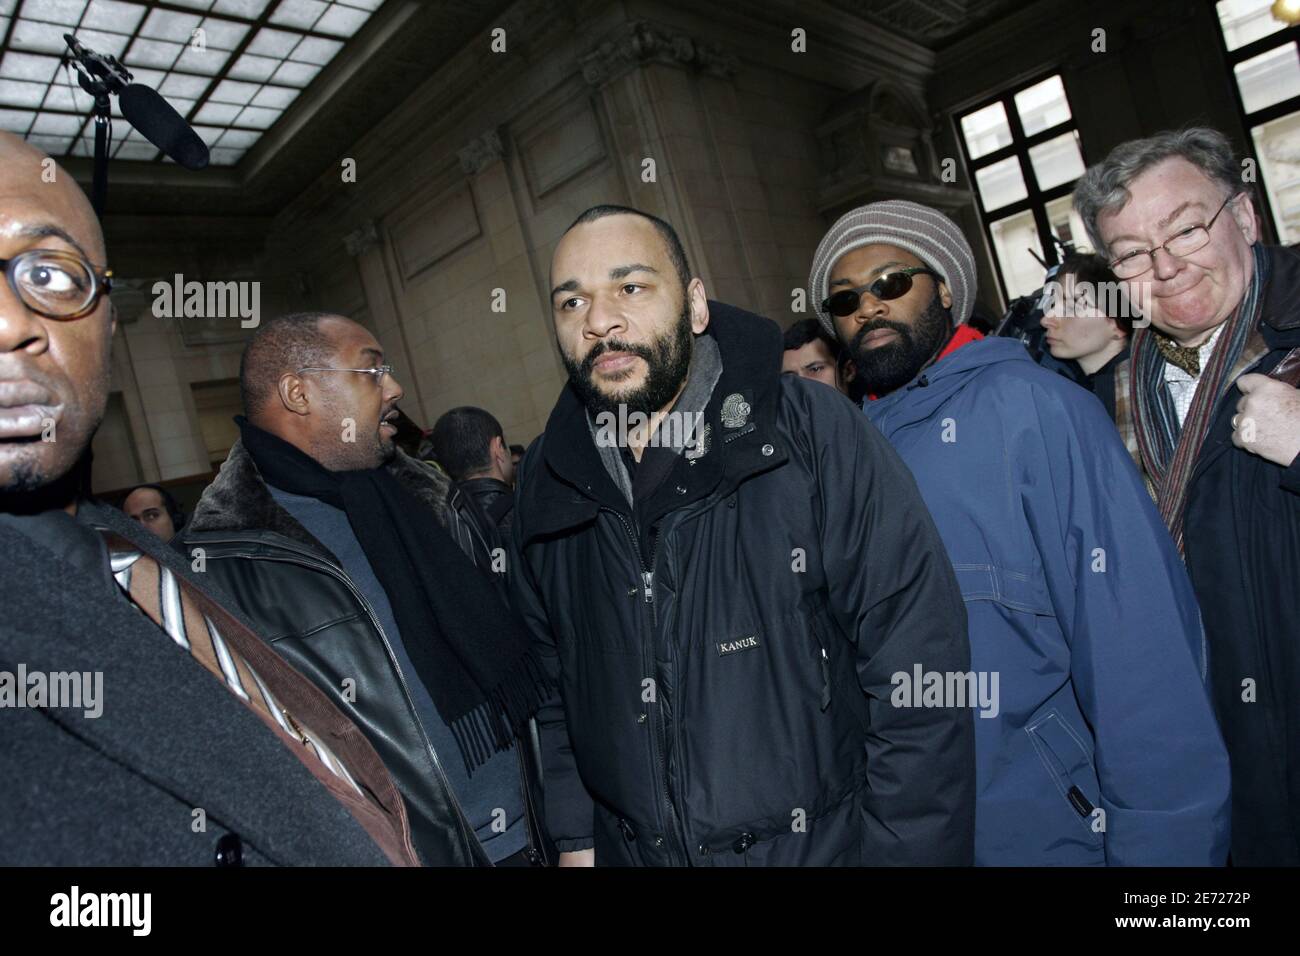 French humorist, Dieudonne arrives at the Court of Paris during the lawsuit against Charlie Hebdo, French satirical weekly magazine which printed cartoons of the Prophet Muhammad, in Paris, France on February 8, 2007. Photo by Thibault Camus/ABACAPRESS Stock Photo